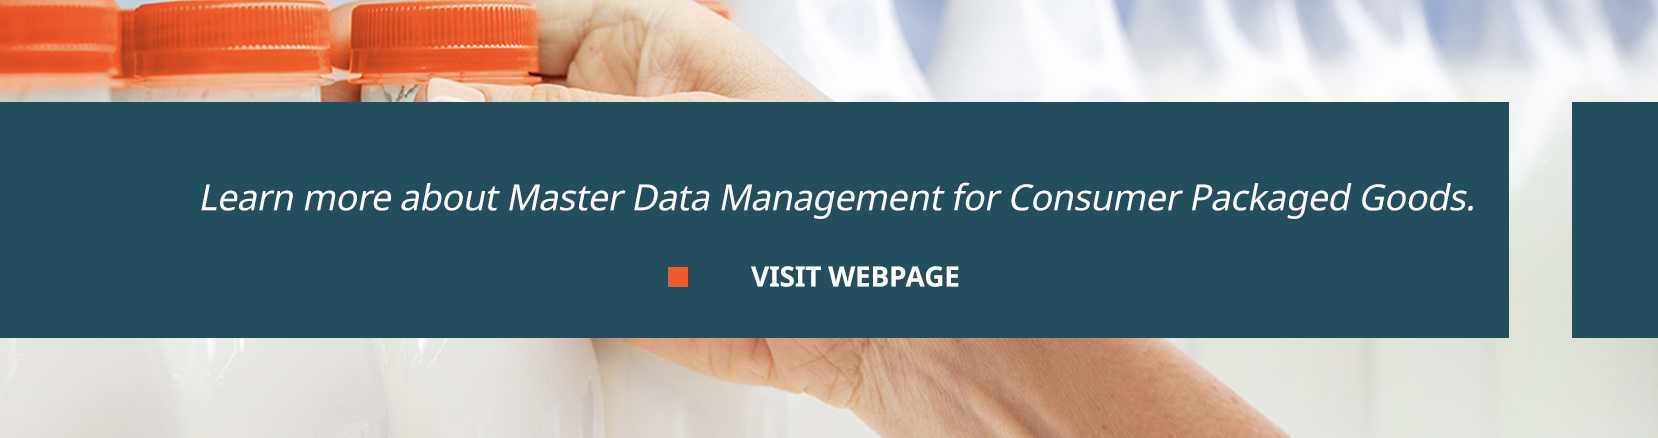 learn more about master data management for consumer packaged goods